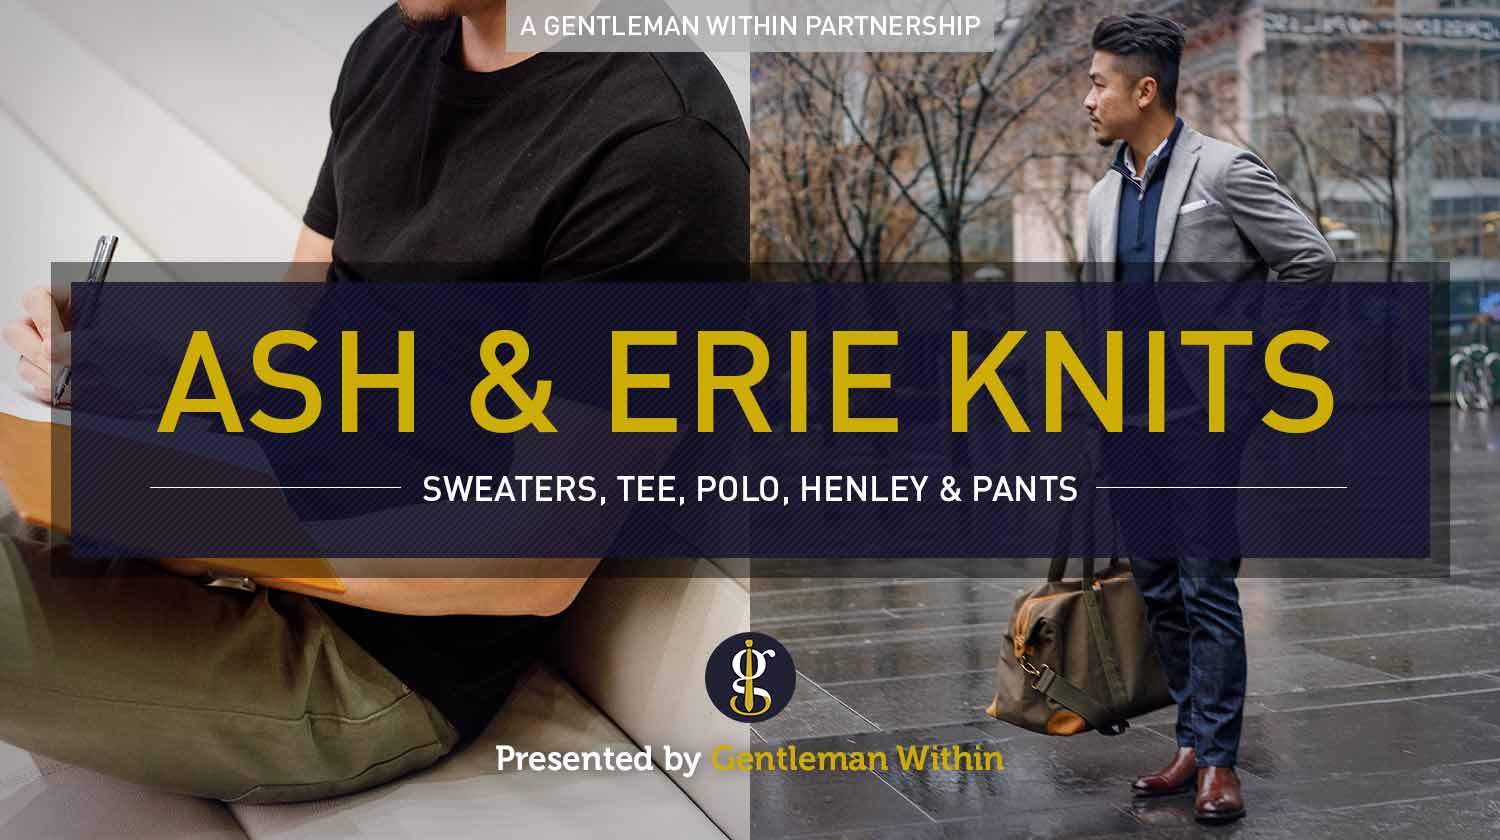 Ash & Erie Knitwear: Featuring Sweaters, Polo, Tee, Henley and Pants | GENTLEMAN WITHIN